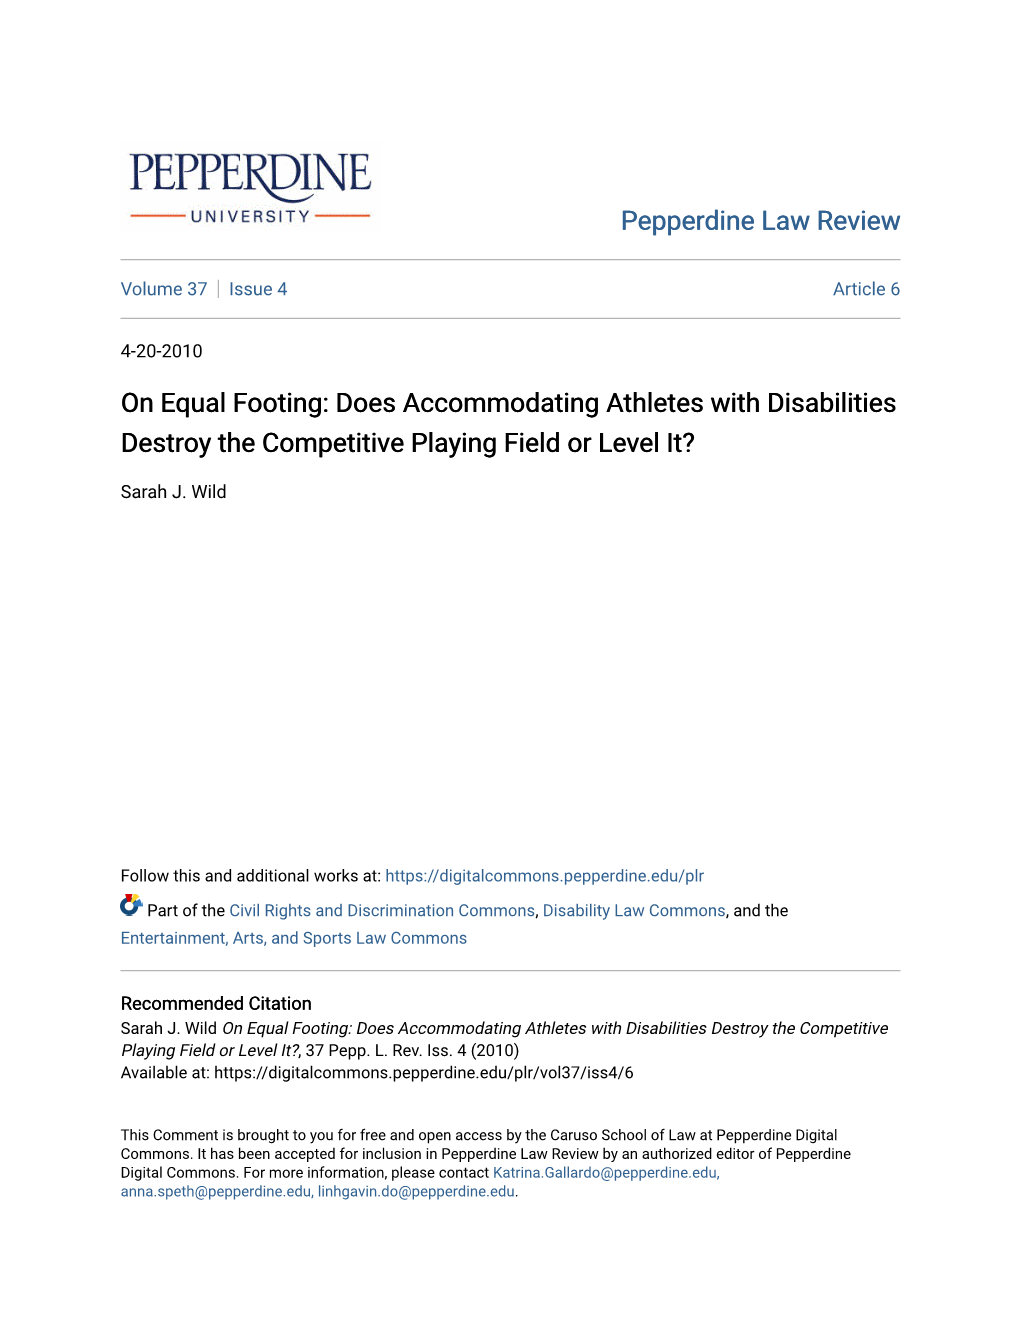 On Equal Footing: Does Accommodating Athletes with Disabilities Destroy the Competitive Playing Field Or Level It?